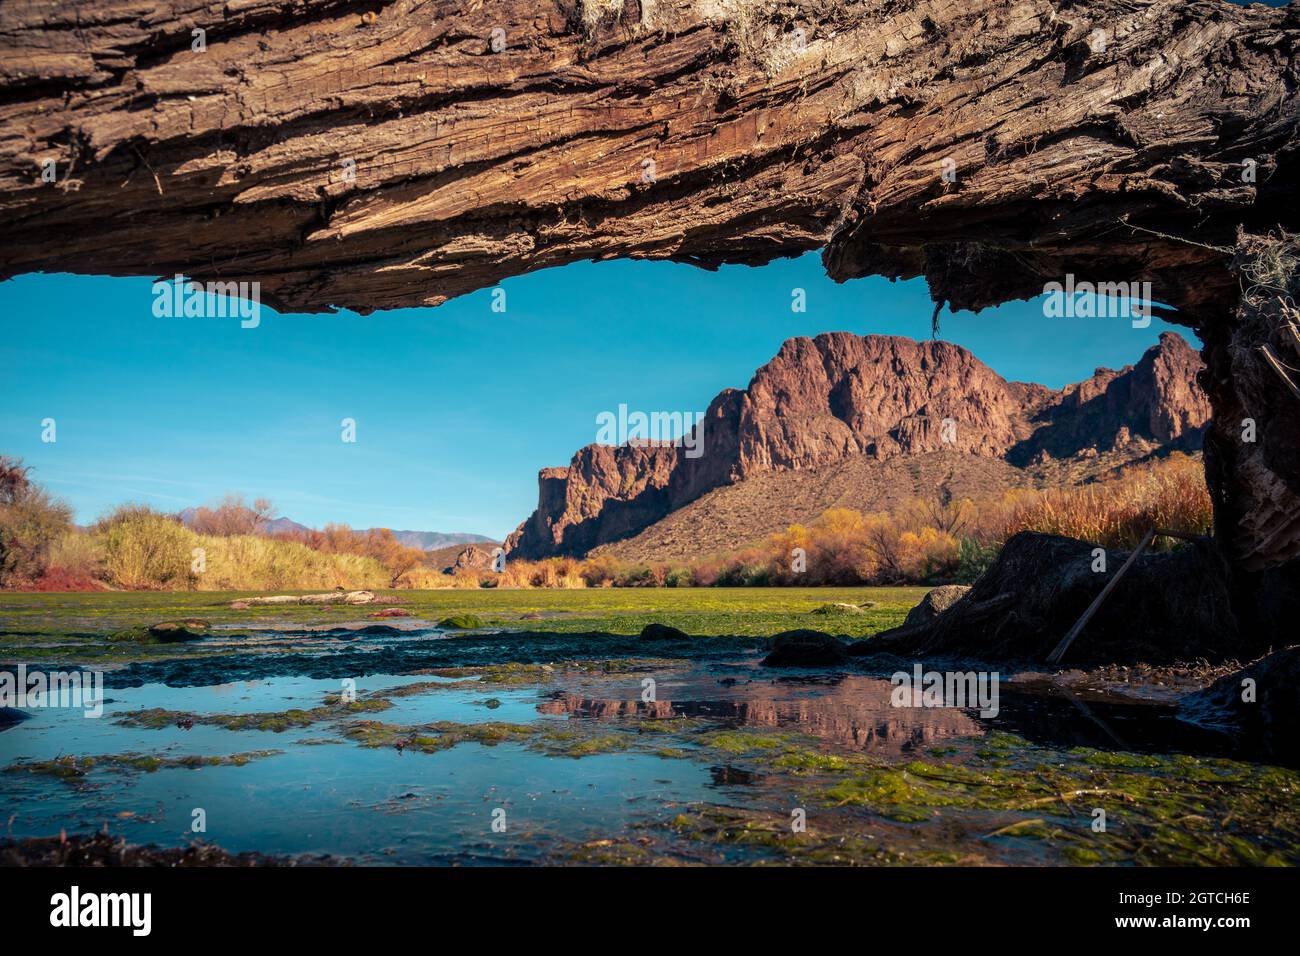 Scenic View Of Rock Formations In Water Stock Photo